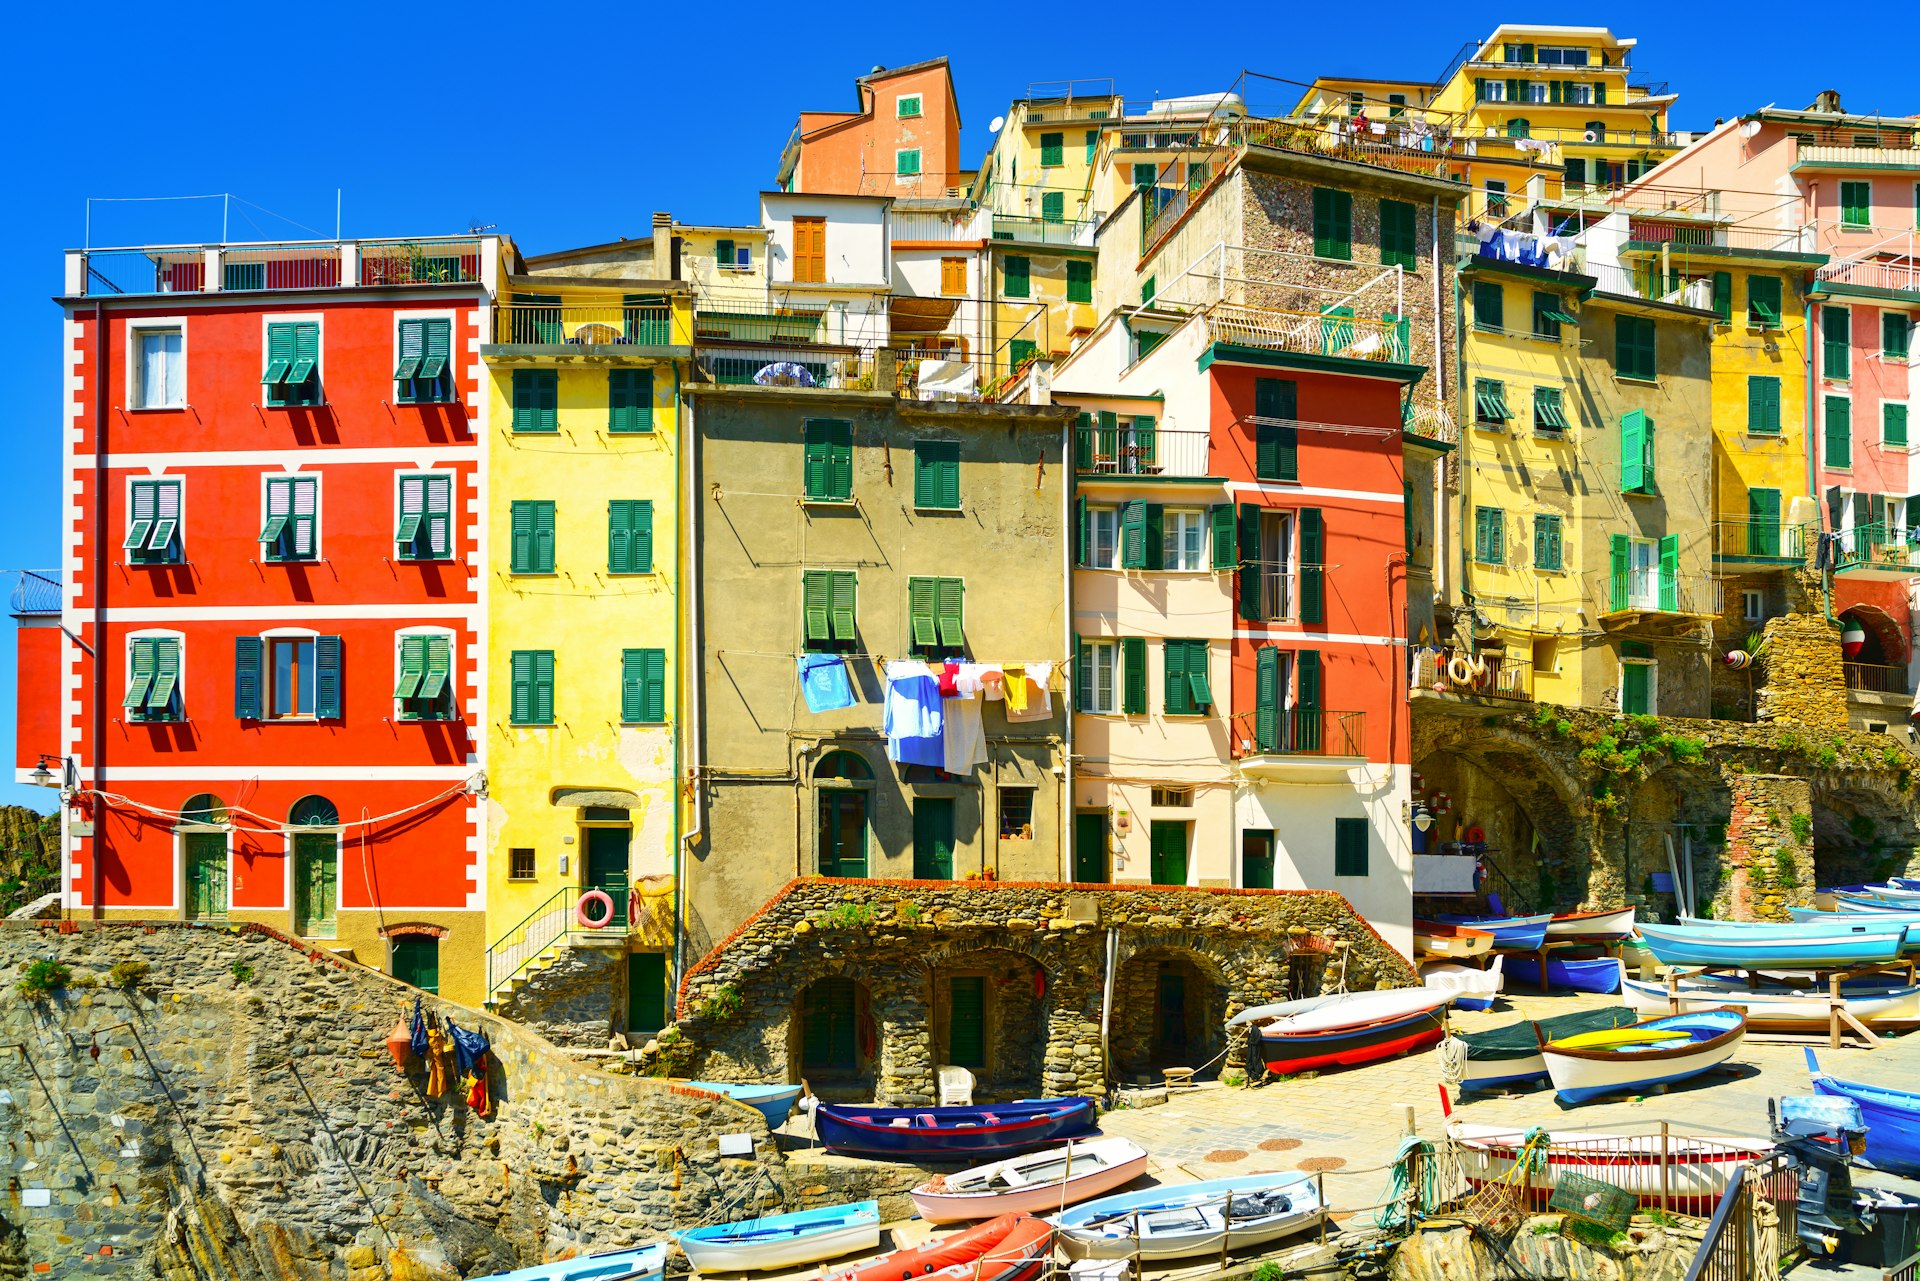 Village street in Riomaggiore, Cinque Terre, with boats and colorful houses